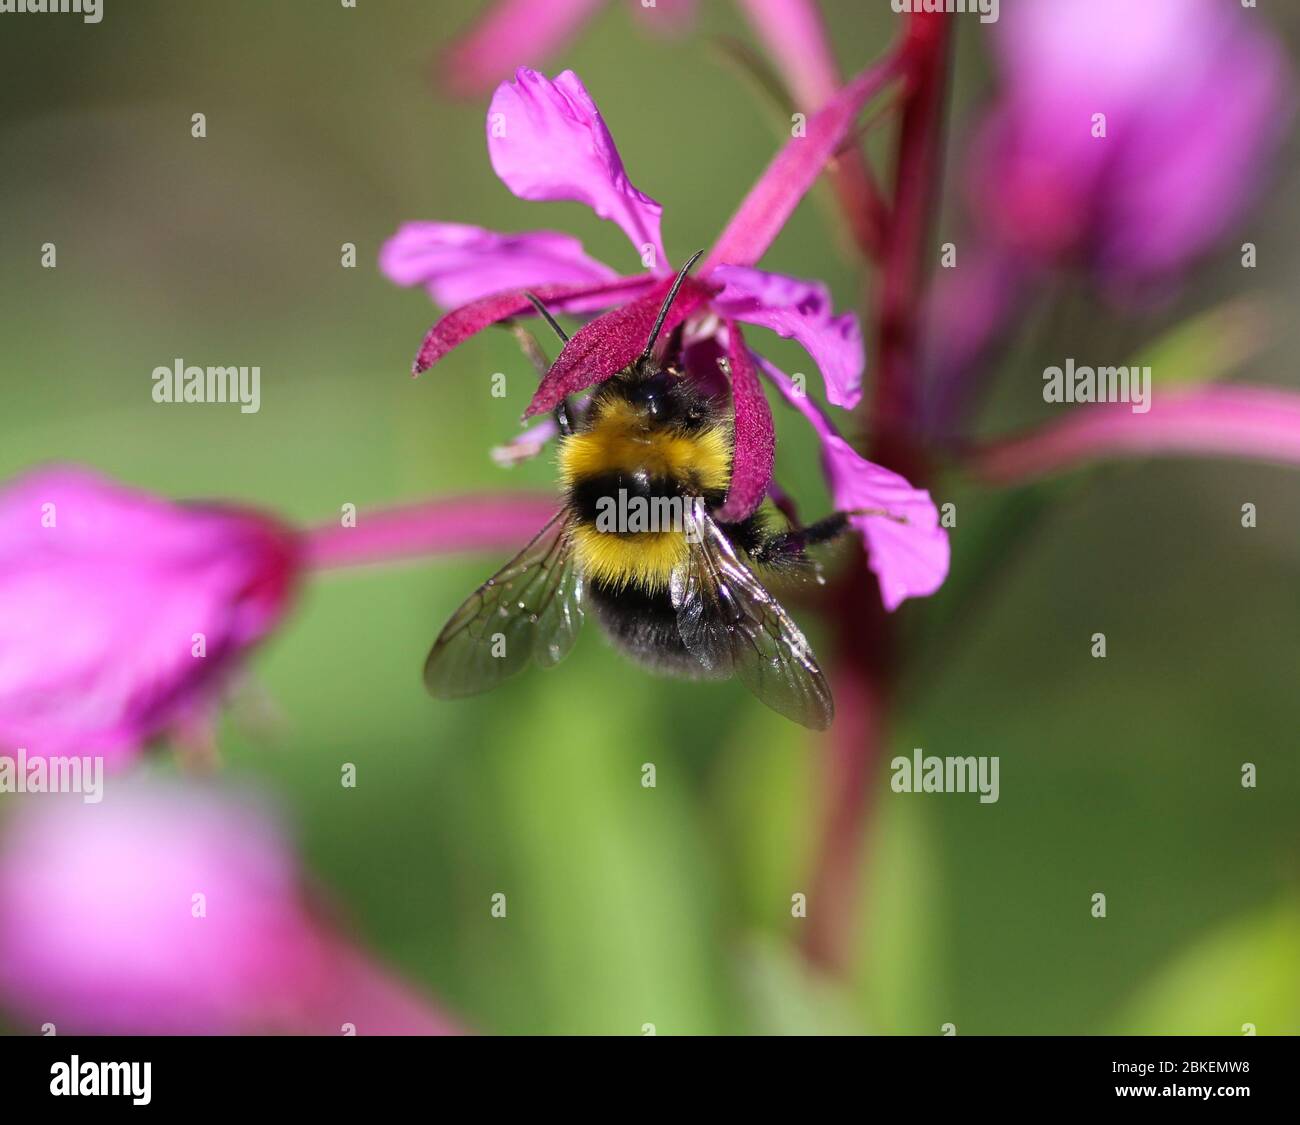 Close up of Bombus bohemicus, also known as the gypsy's cuckoo bumblebee Stock Photo